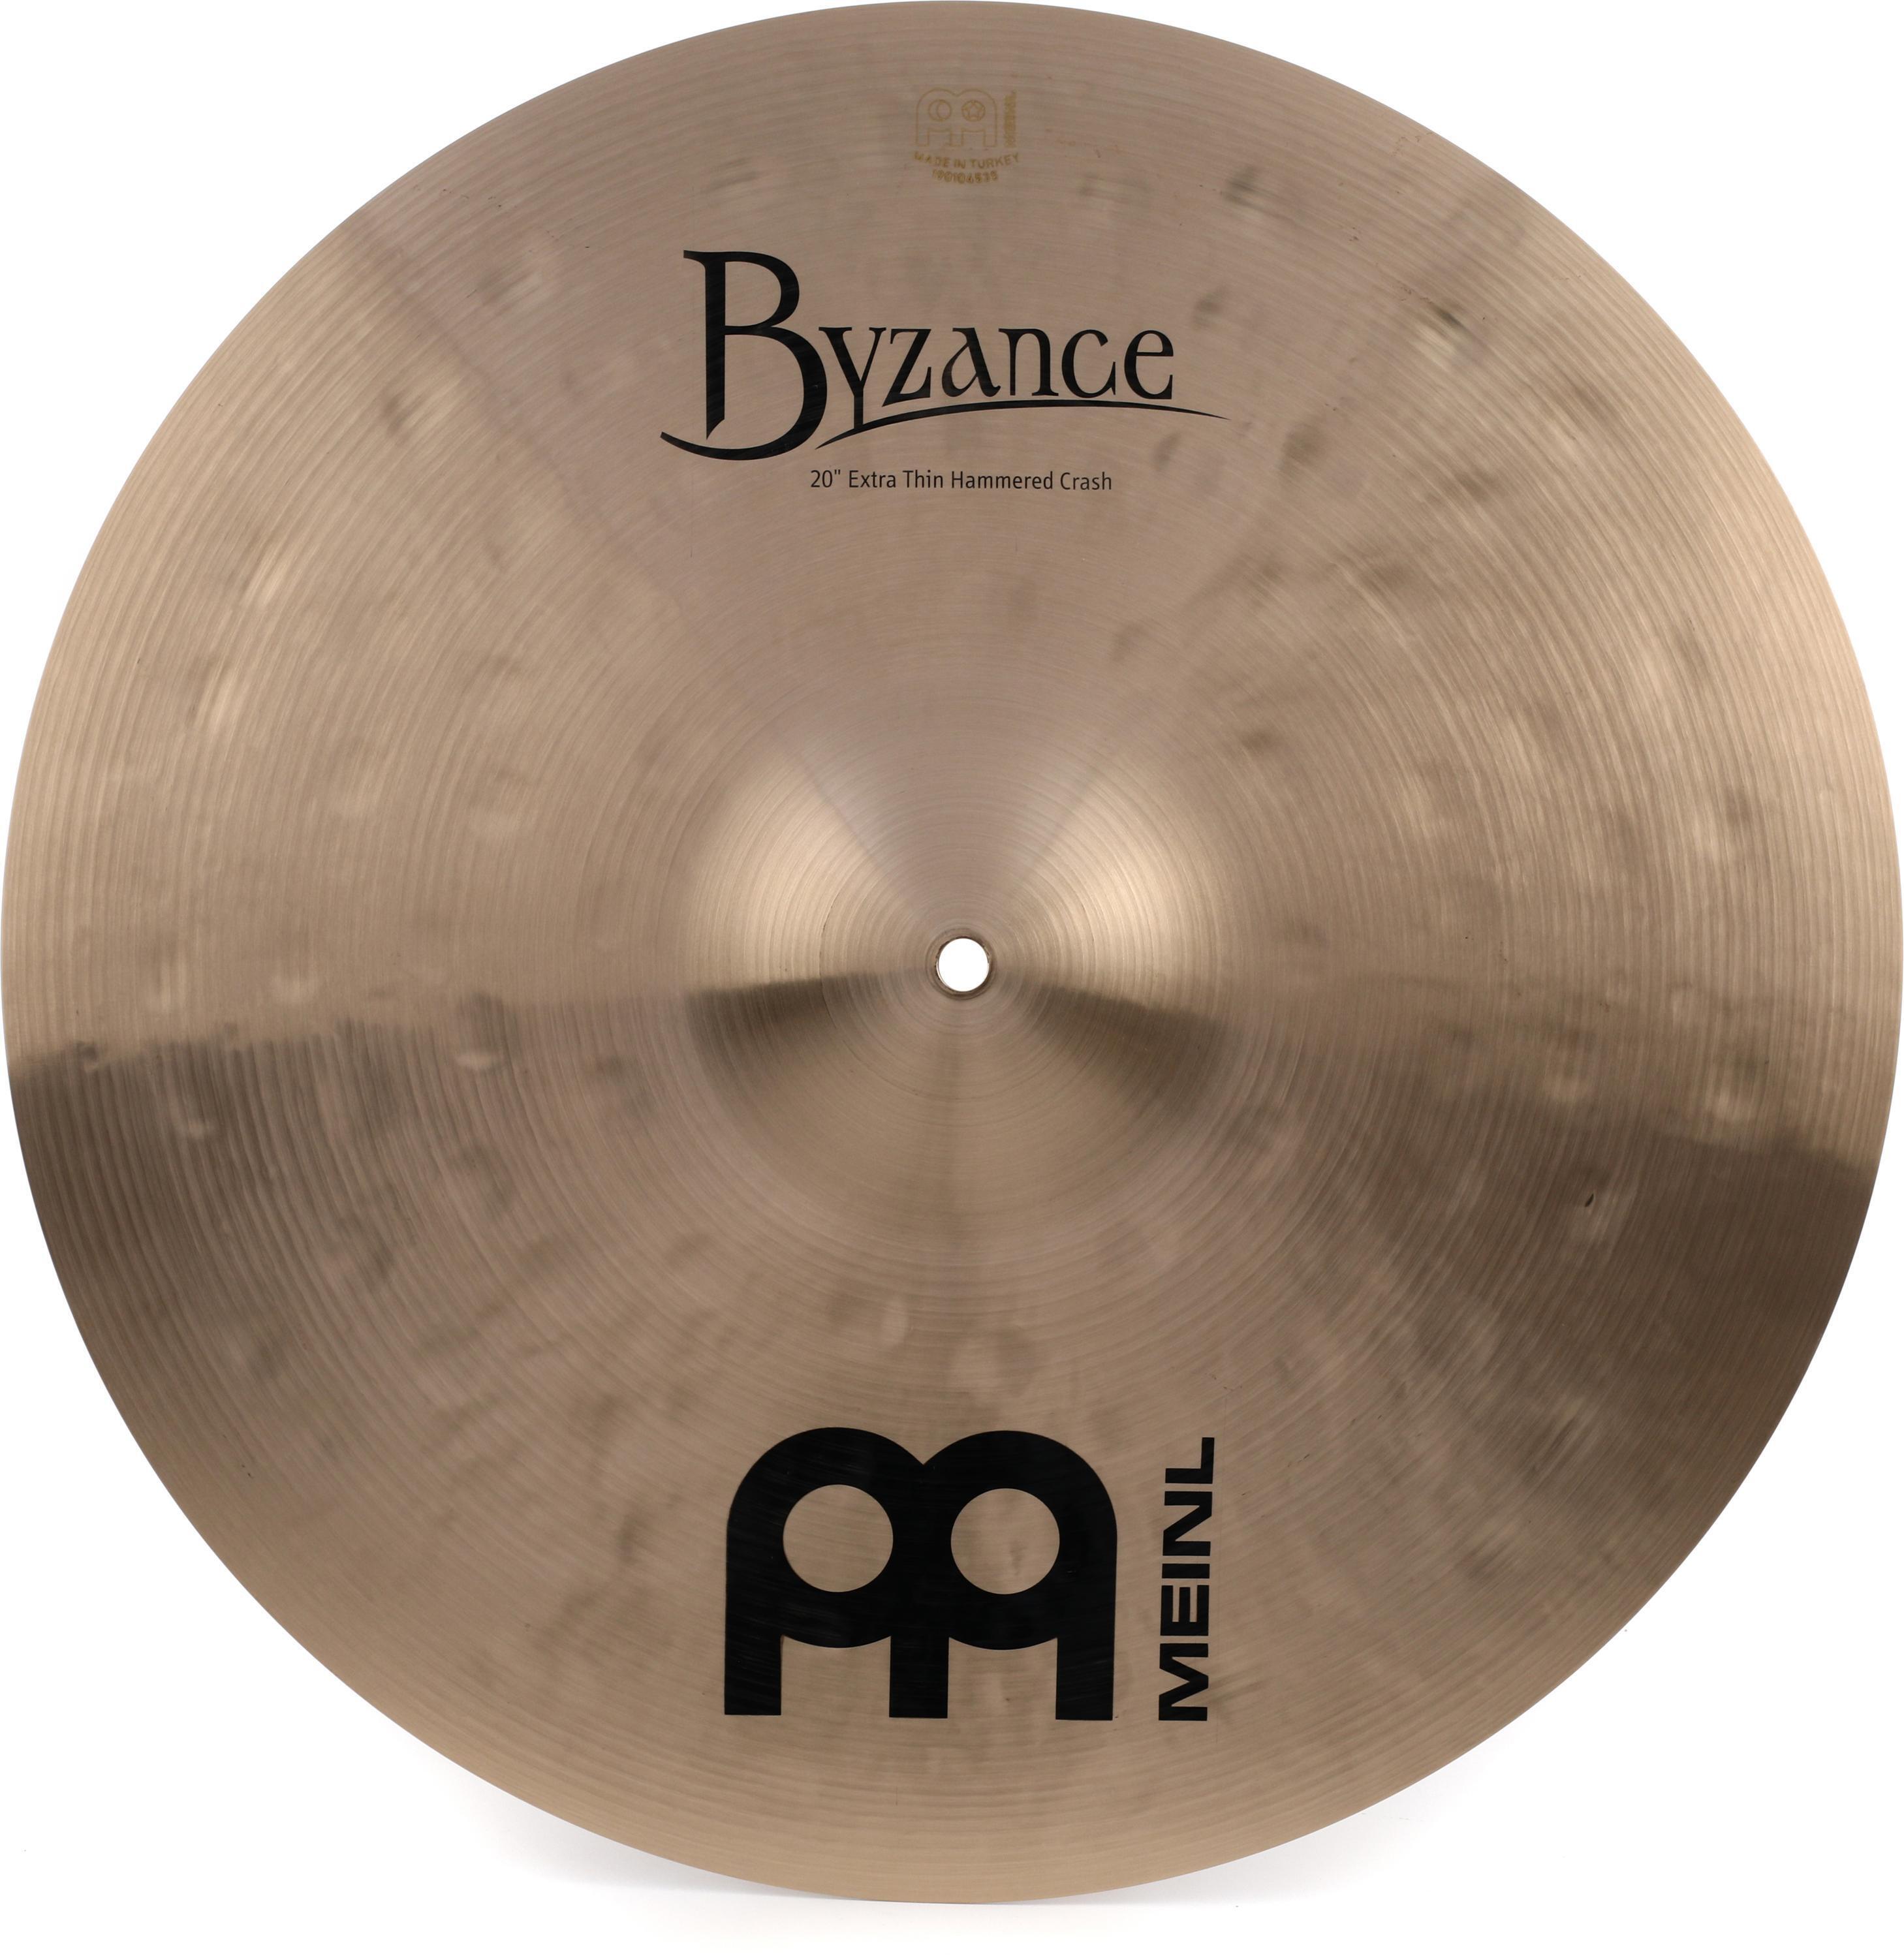 Meinl Cymbals 20 inch Byzance Traditional Extra Thin Hammered